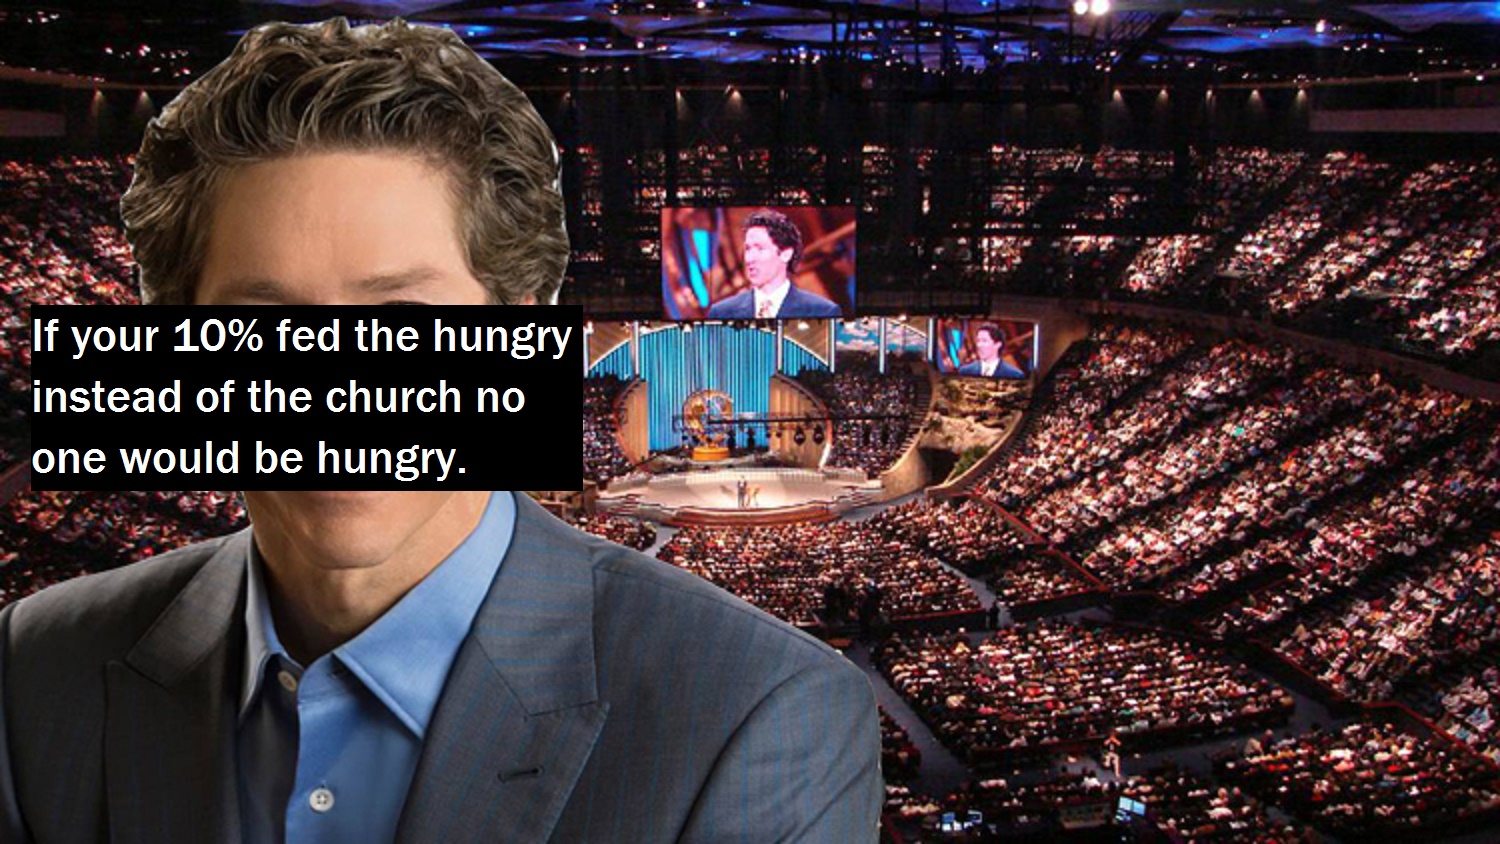 If your 10% fed the hungry instead of the church no one would be hungry.